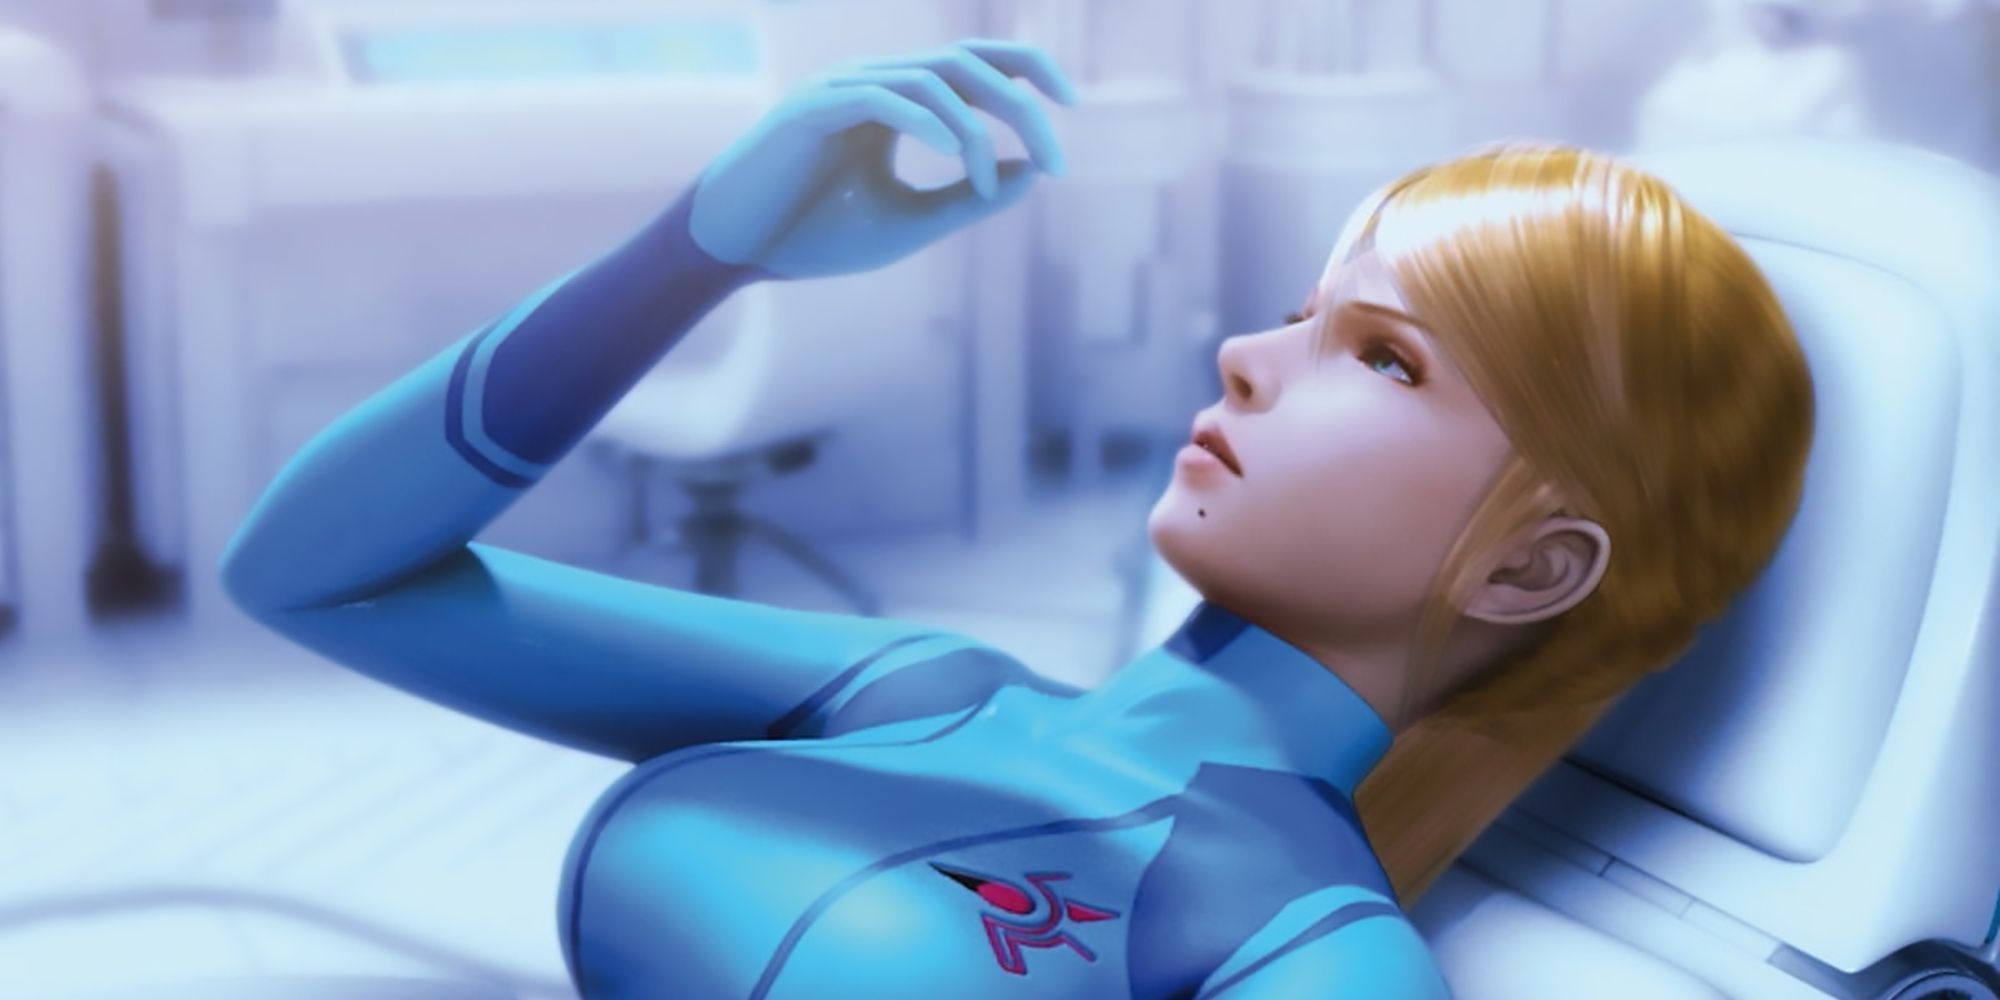 Samus in her Zero Suit lying in a lab room from a cutscene in Other M